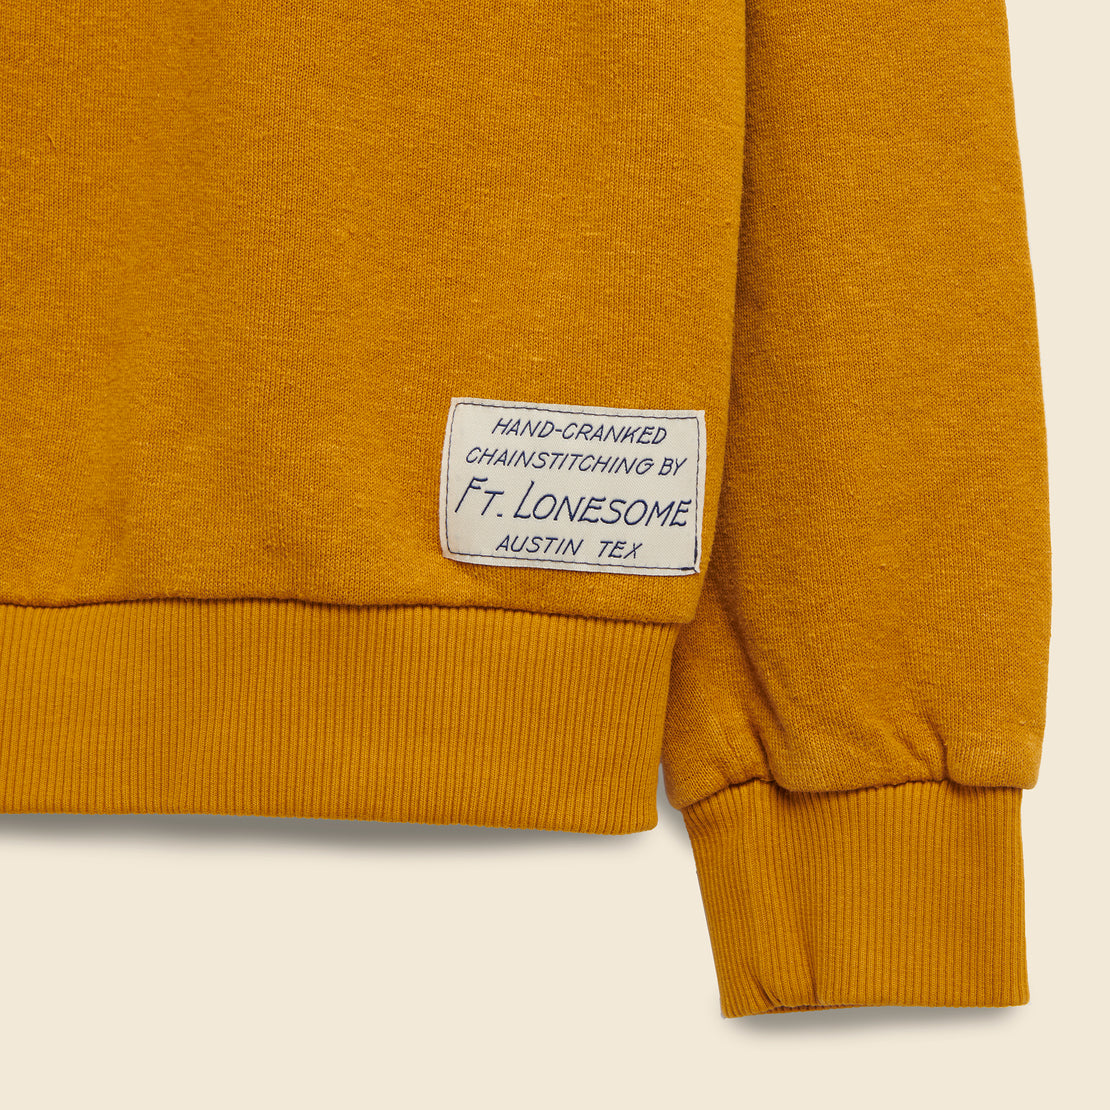 DAUGHTER Sweatshirt - Gold/Cream - Fort Lonesome - STAG Provisions - W - Tops - L/S Fleece